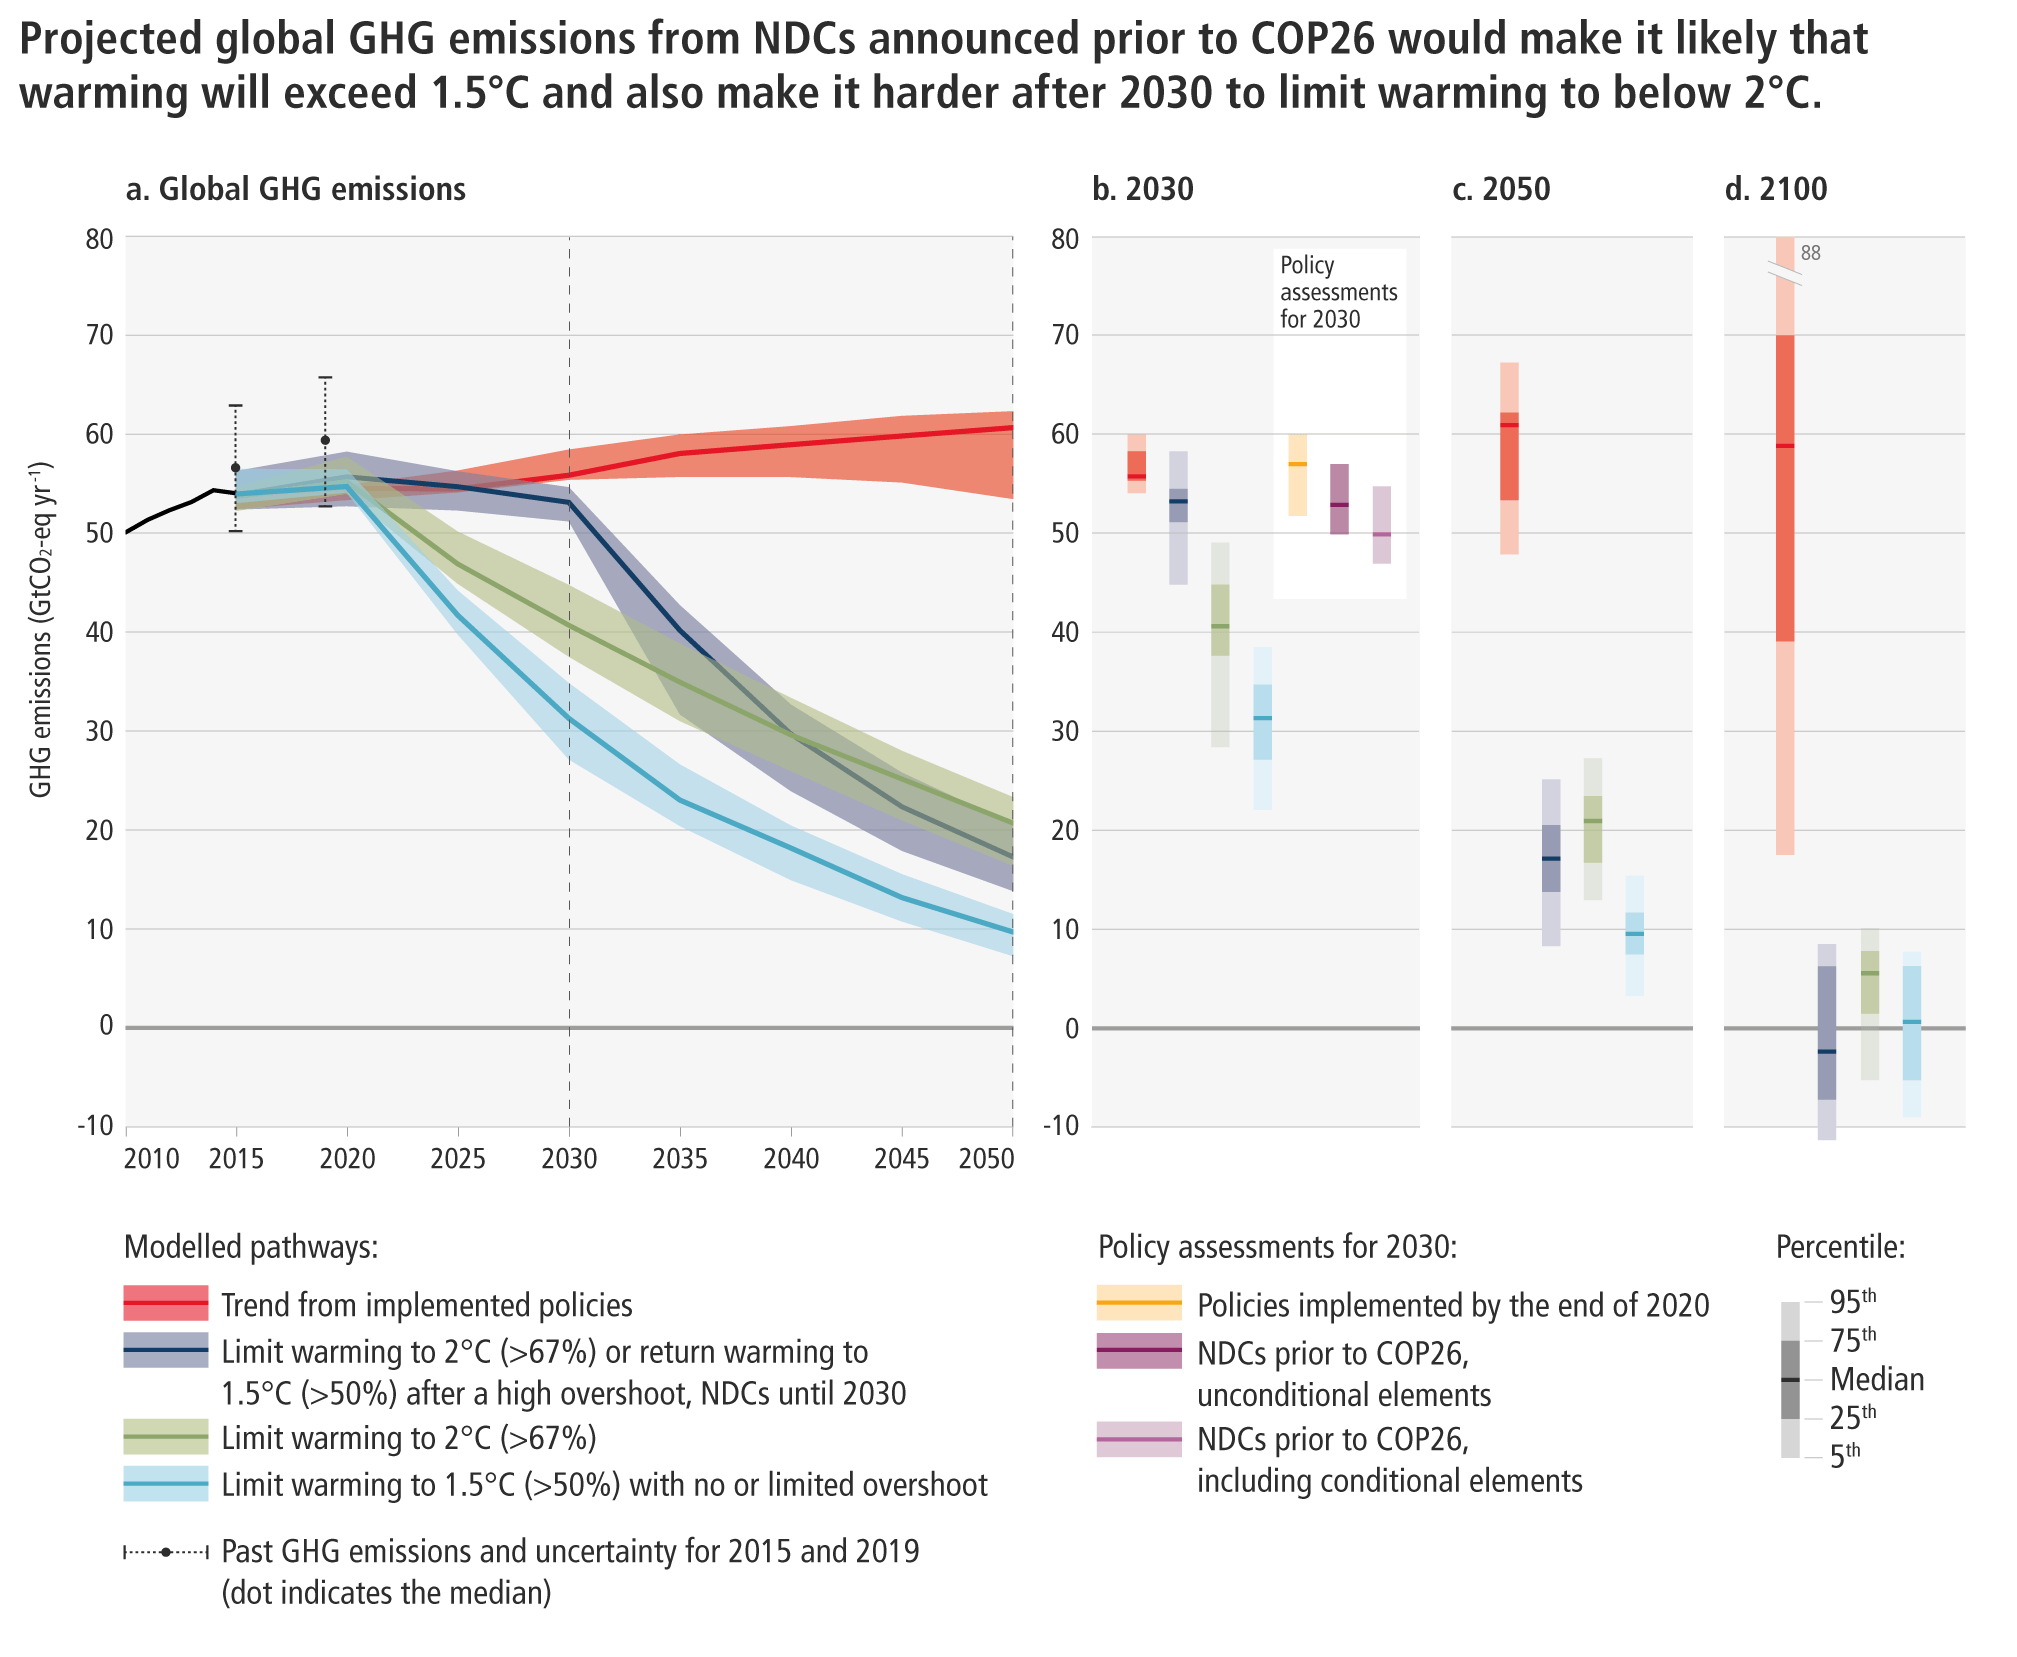 Line chart of GHG emissions under different scenarios to 2050 showing the broad ranges of possible outcomes